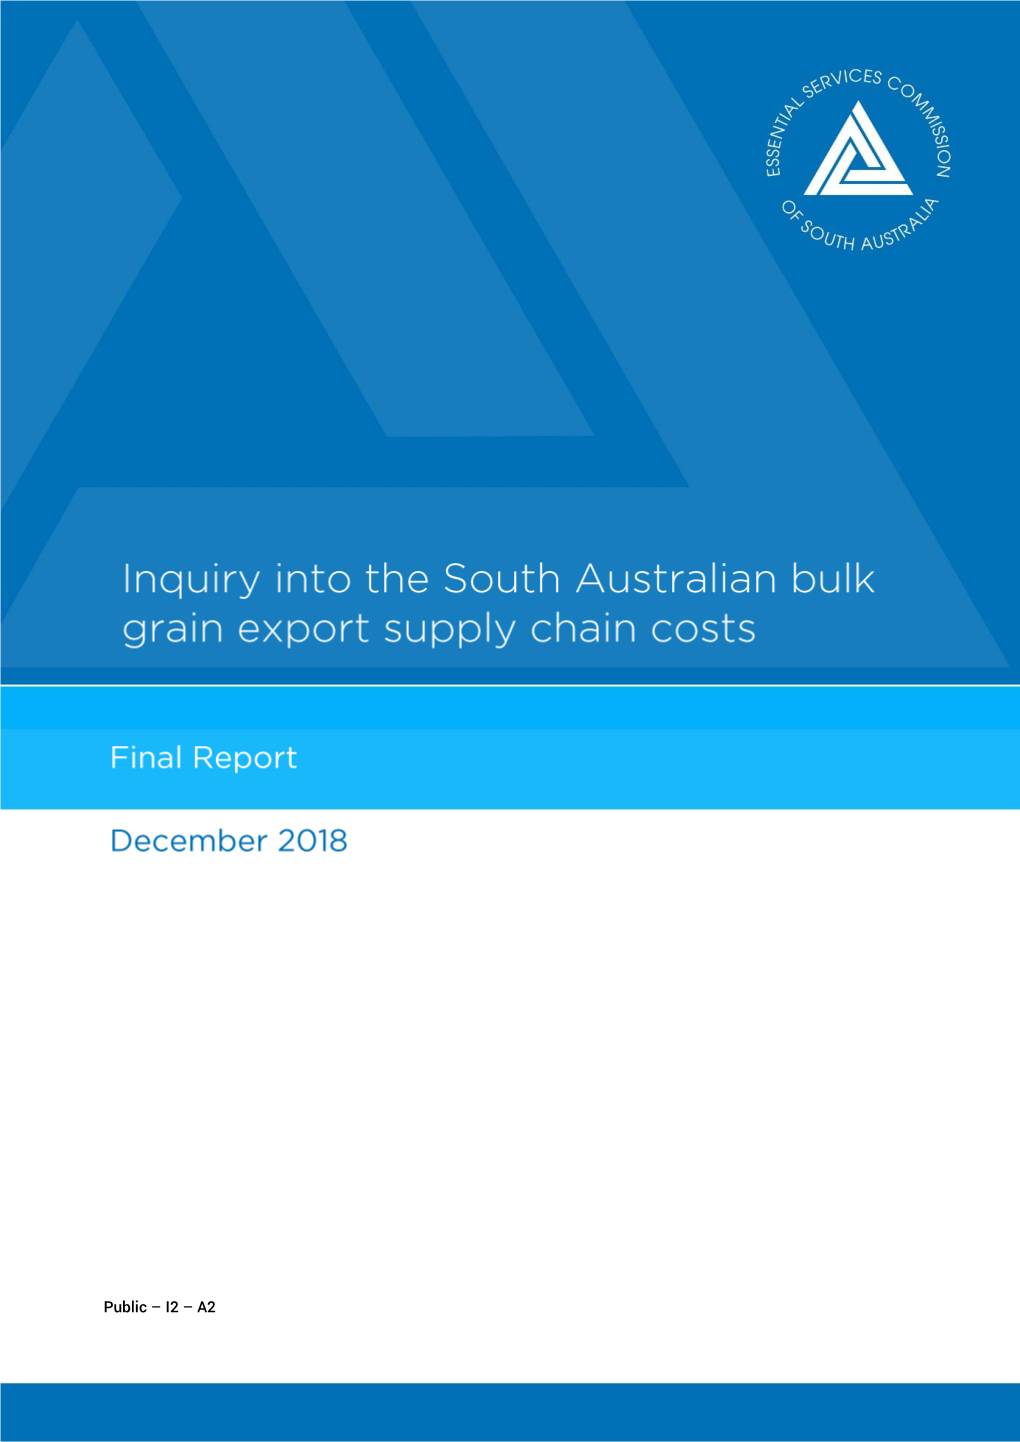 Inquiry to the South Australian Bulk Grain Export Supply Chain Costs